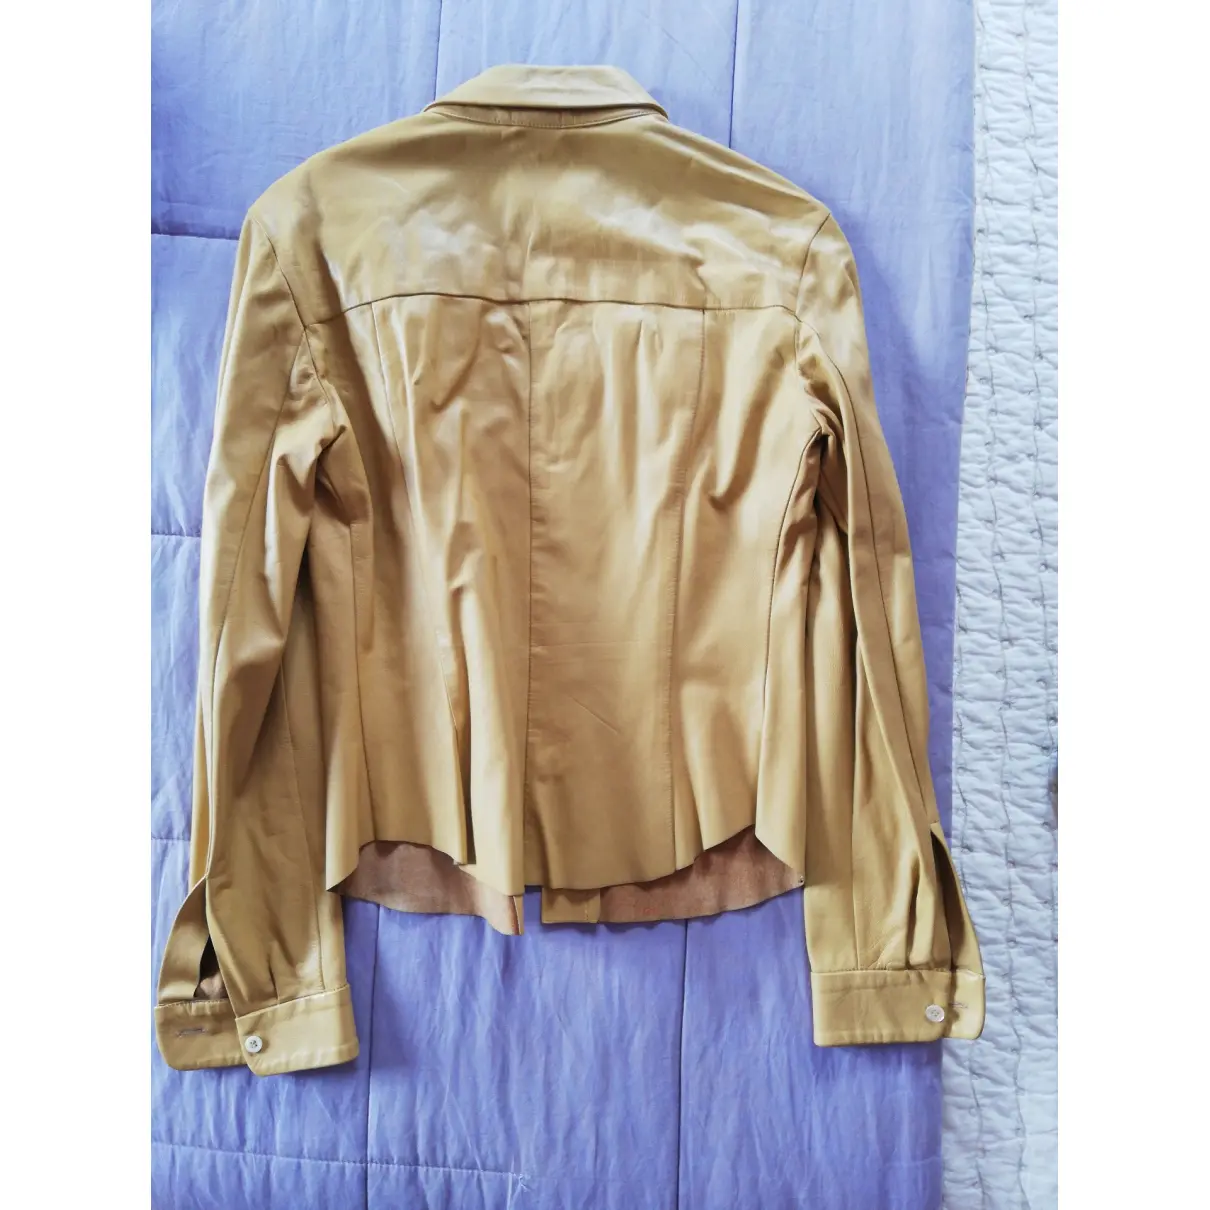 Buy Faconnable Leather top online